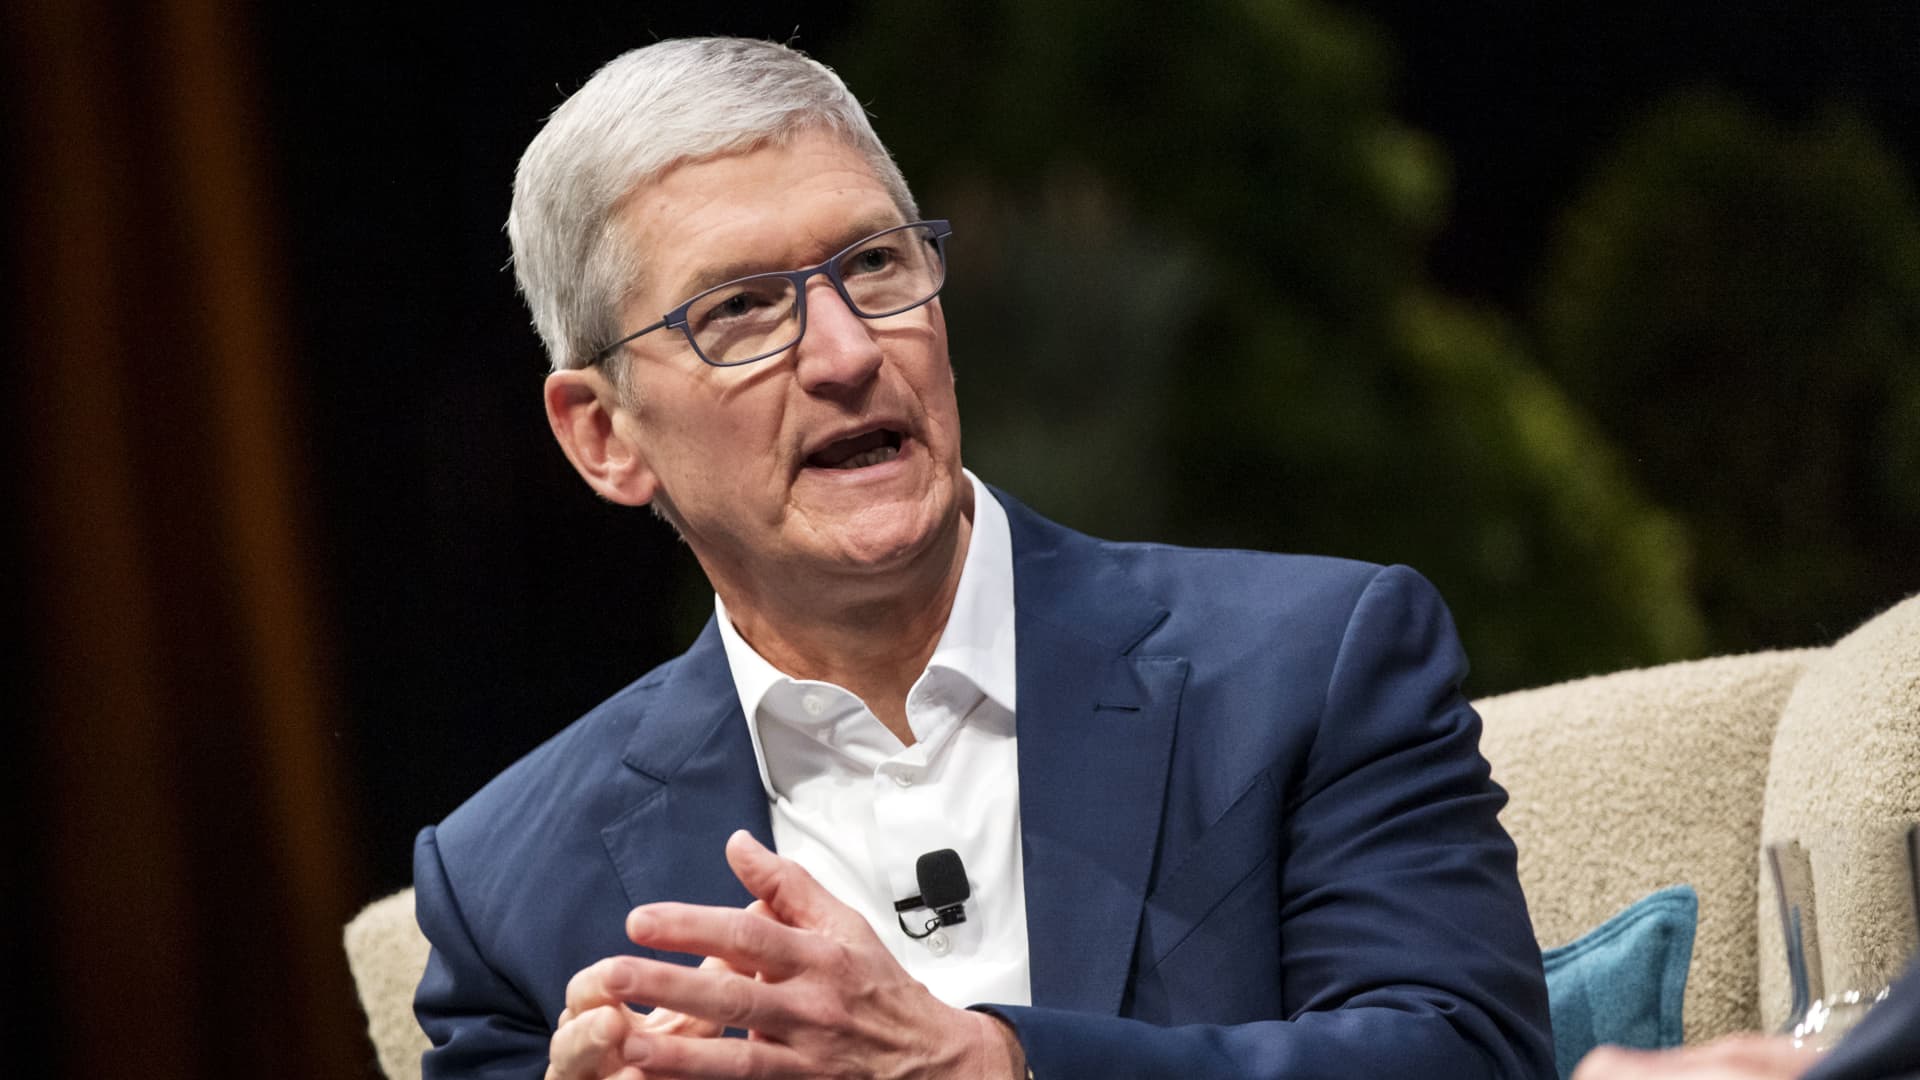 Apple's services success story relies on massive payments from a single partner: Google